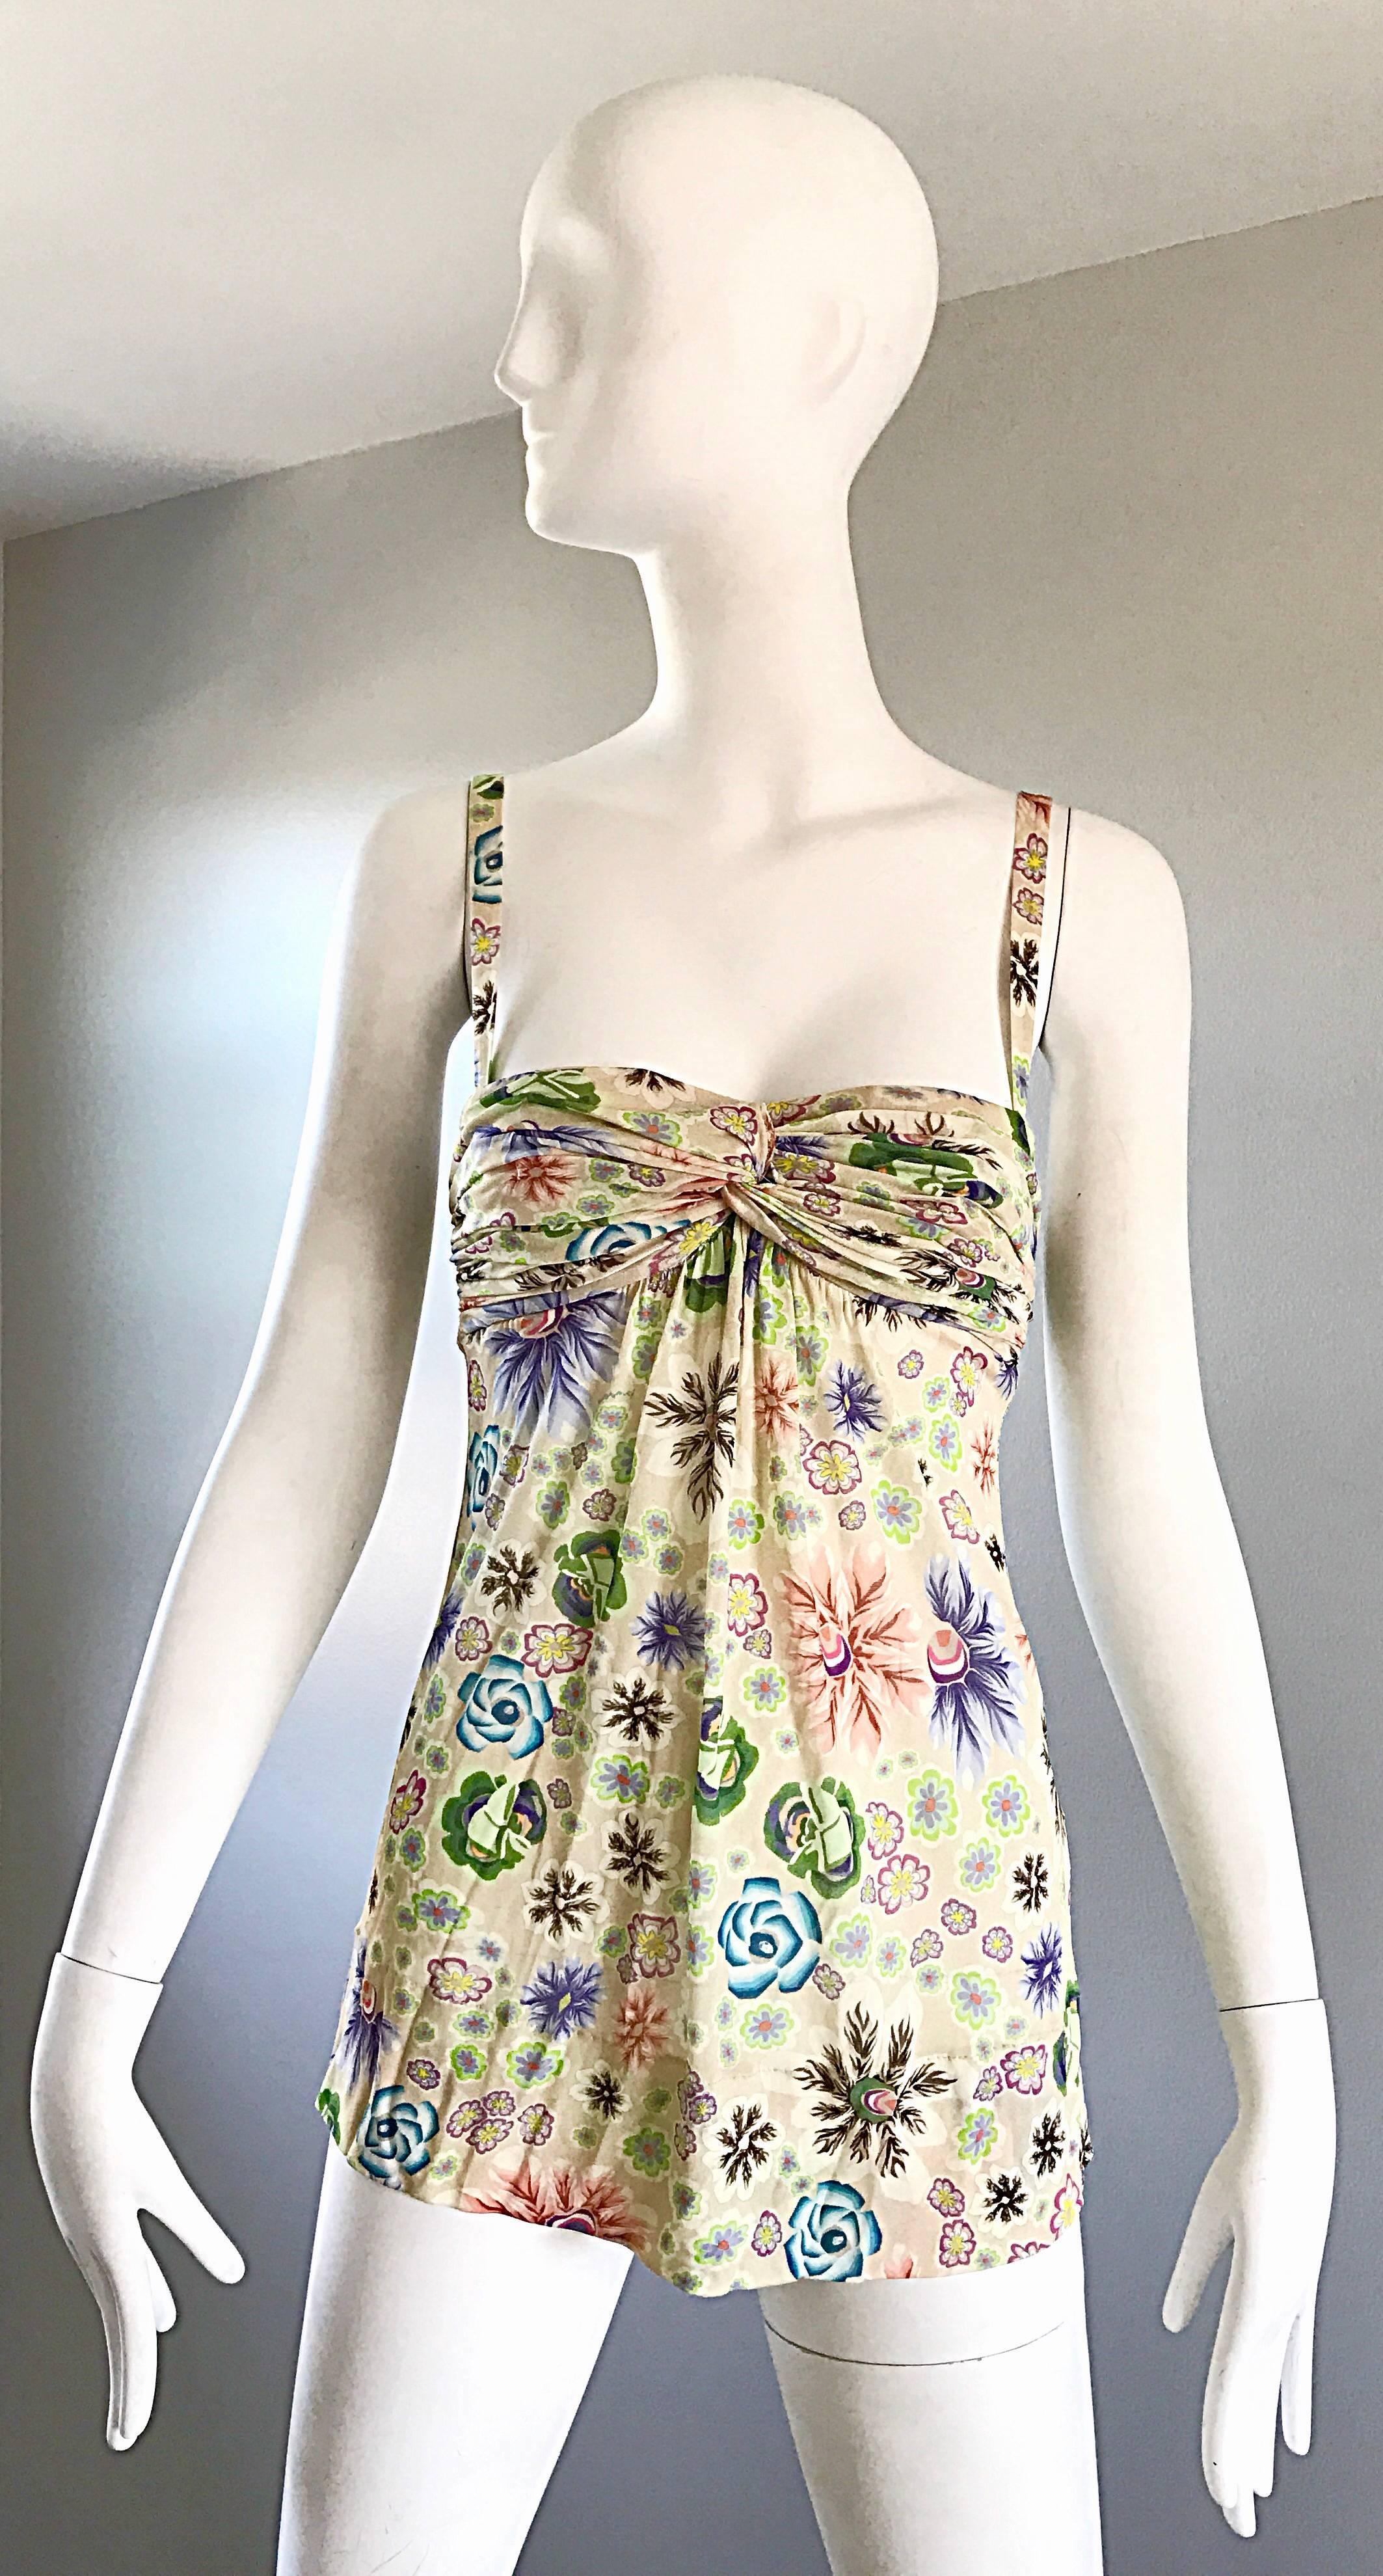 Wonderful vintage 90s MISSONI silk + rayon jersey empire waist sleeveless top! Features flowers in vibrant hues of green, purple, blue and pink throughout. Missoni logo printed in pink throughout. Adorable ball buttons up the back. Amazing colorful